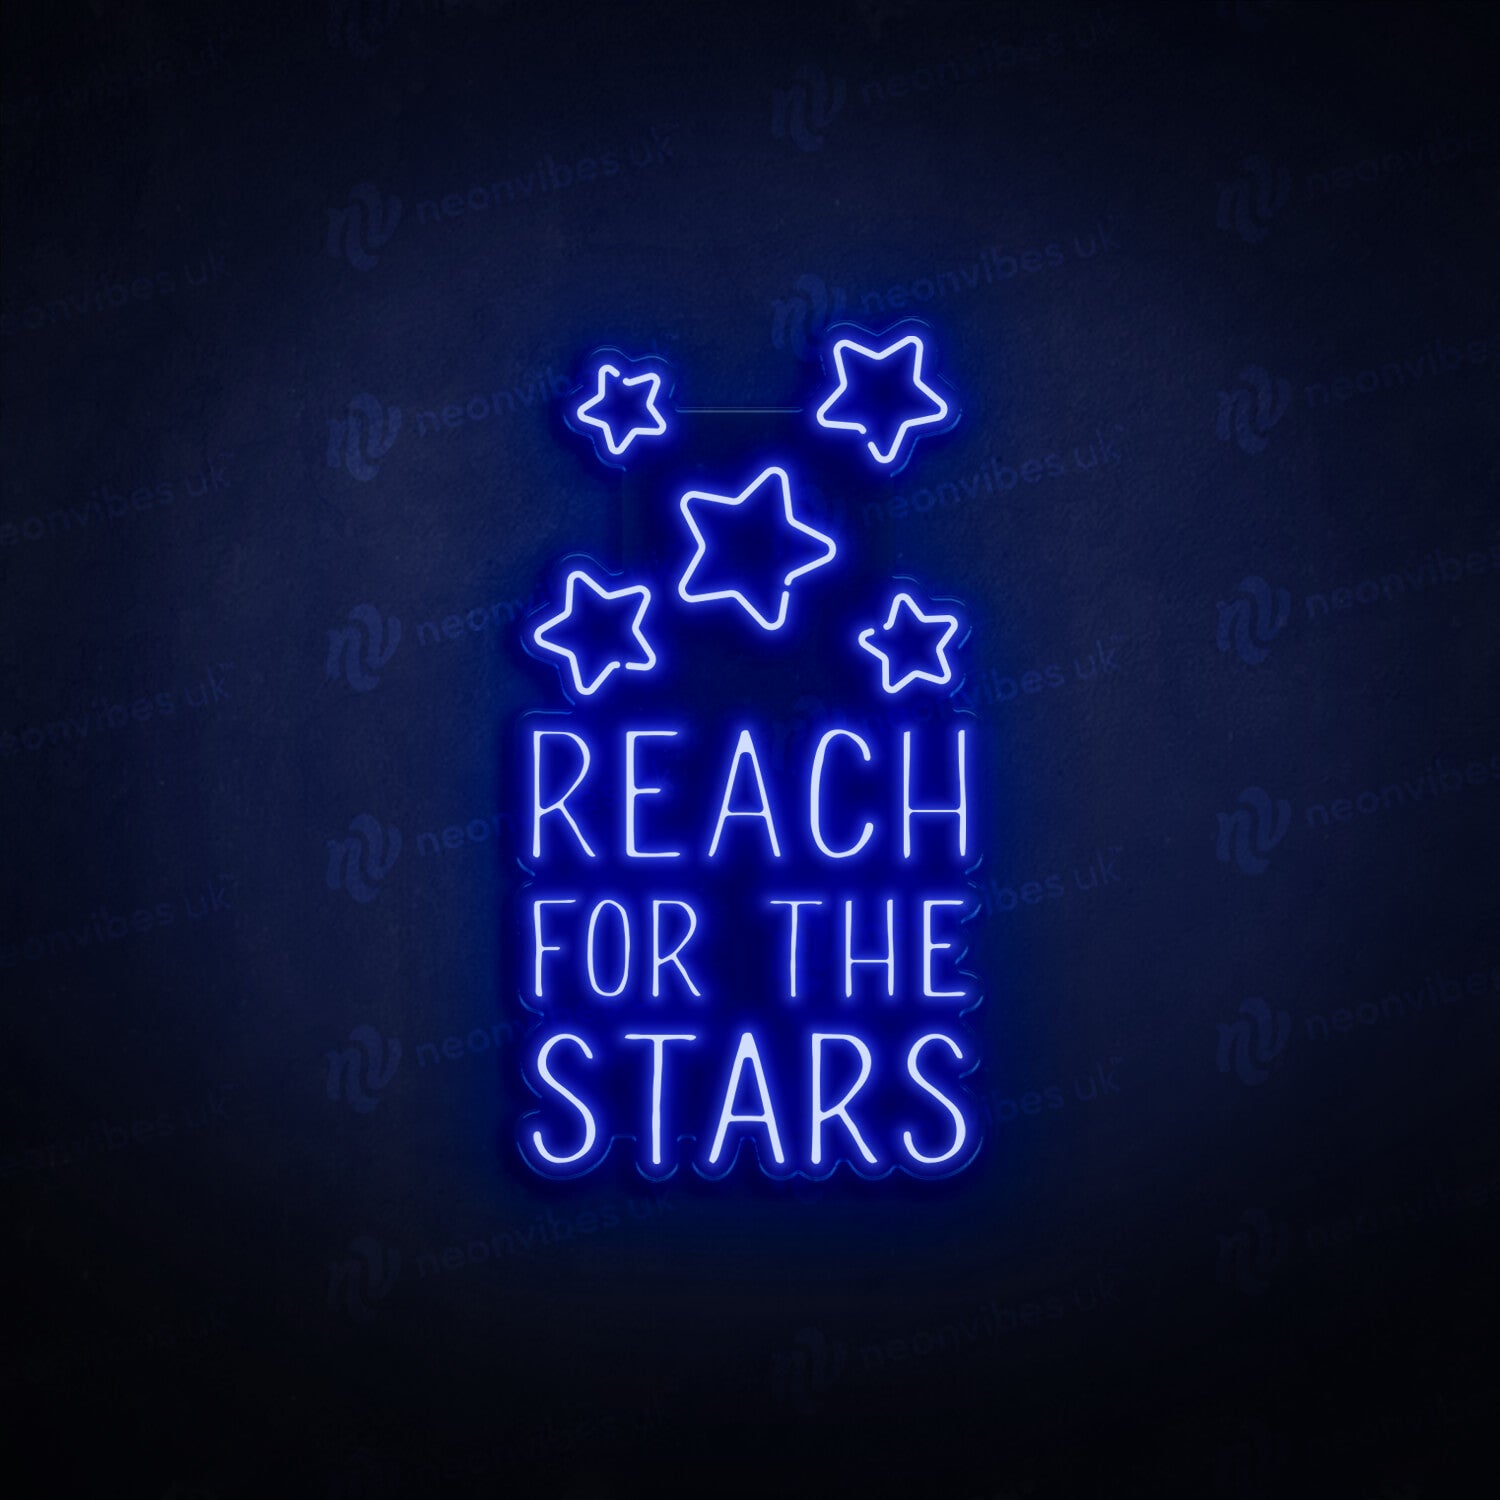 Reach For The Stars neon sign